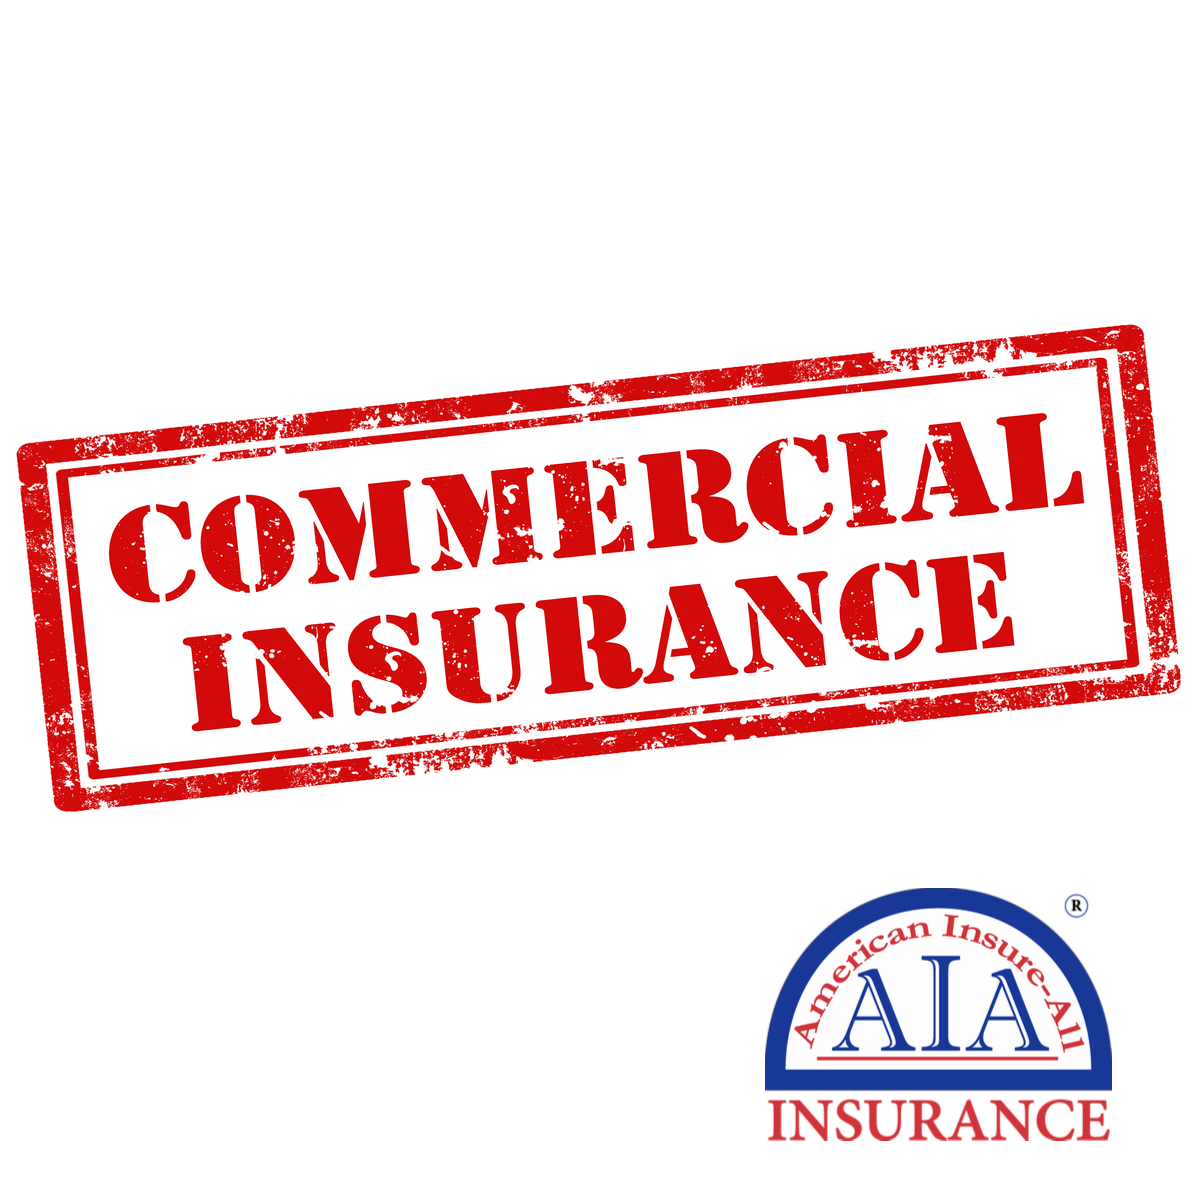 Three Reasons to Invest in Commercial Insurance to Better Secure Your Business